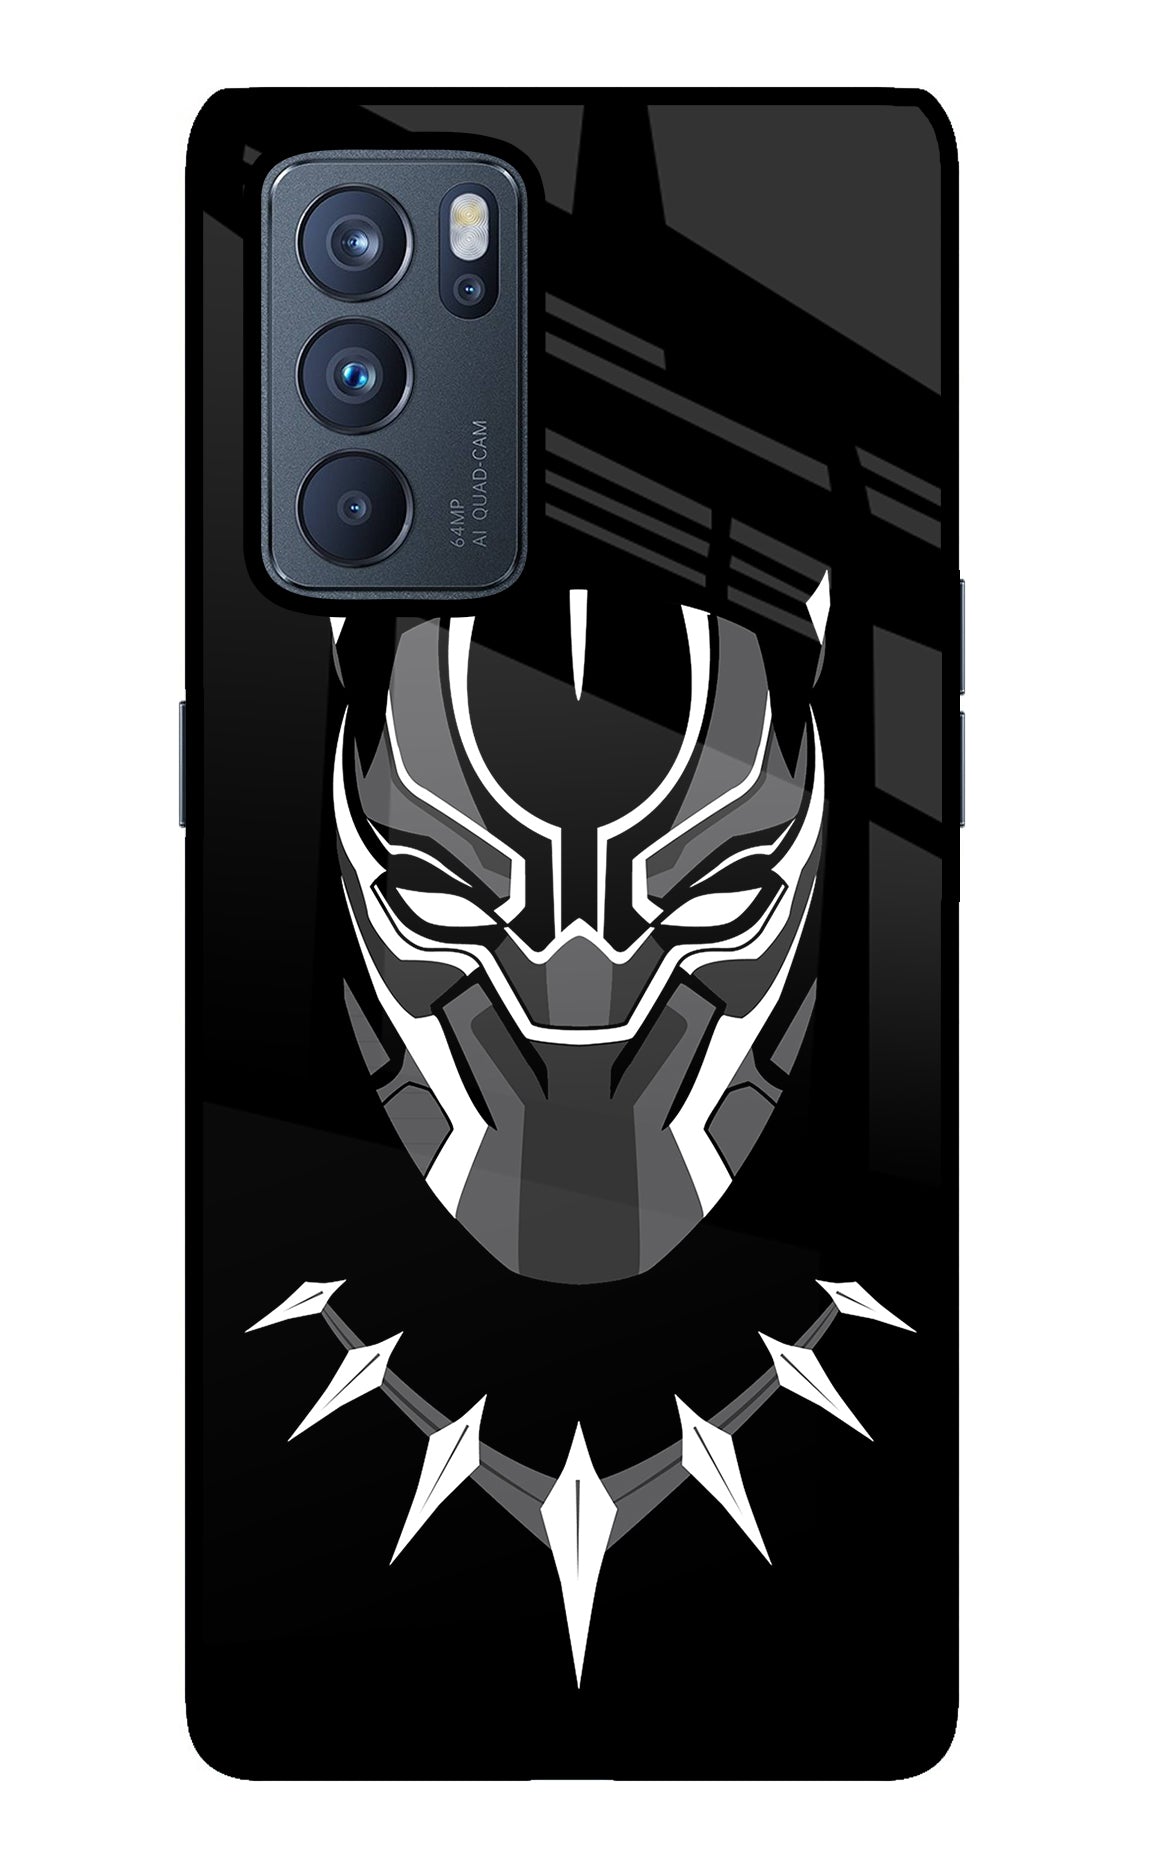 Black Panther Oppo Reno6 Pro 5G Back Cover